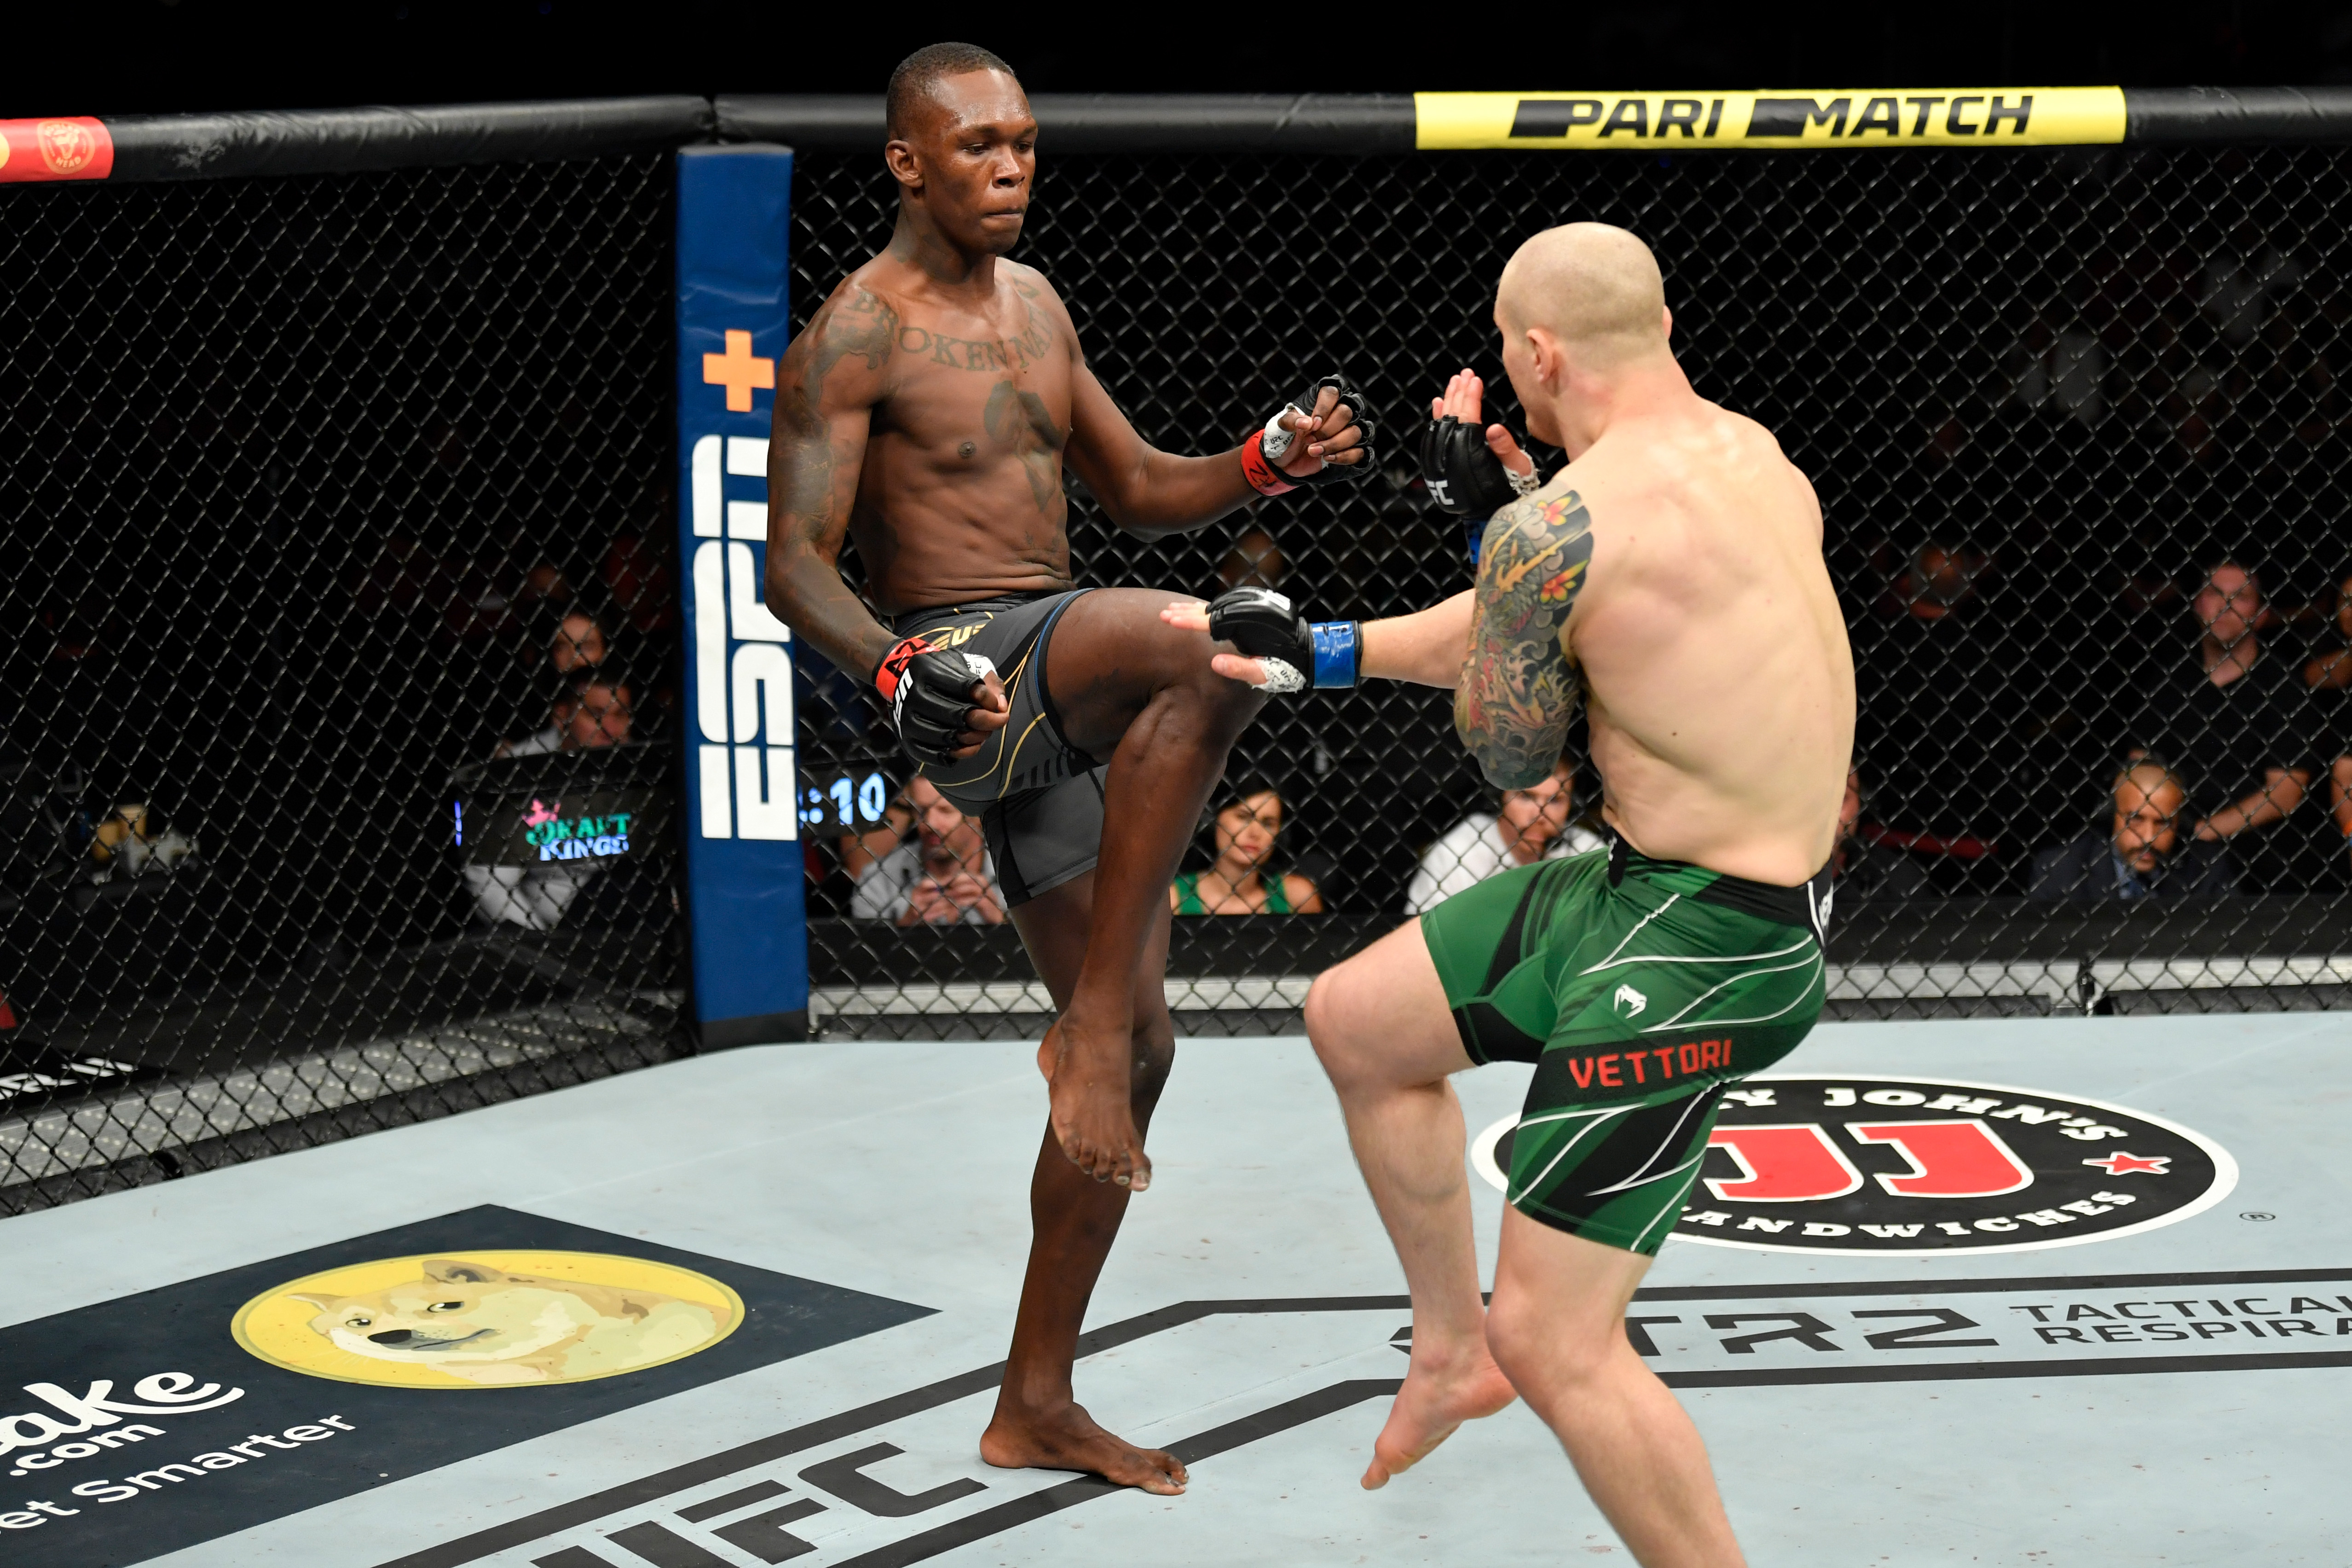 Israel Adesanya fires a kick at Marvin Vettori during their UFC 263 championship bout.